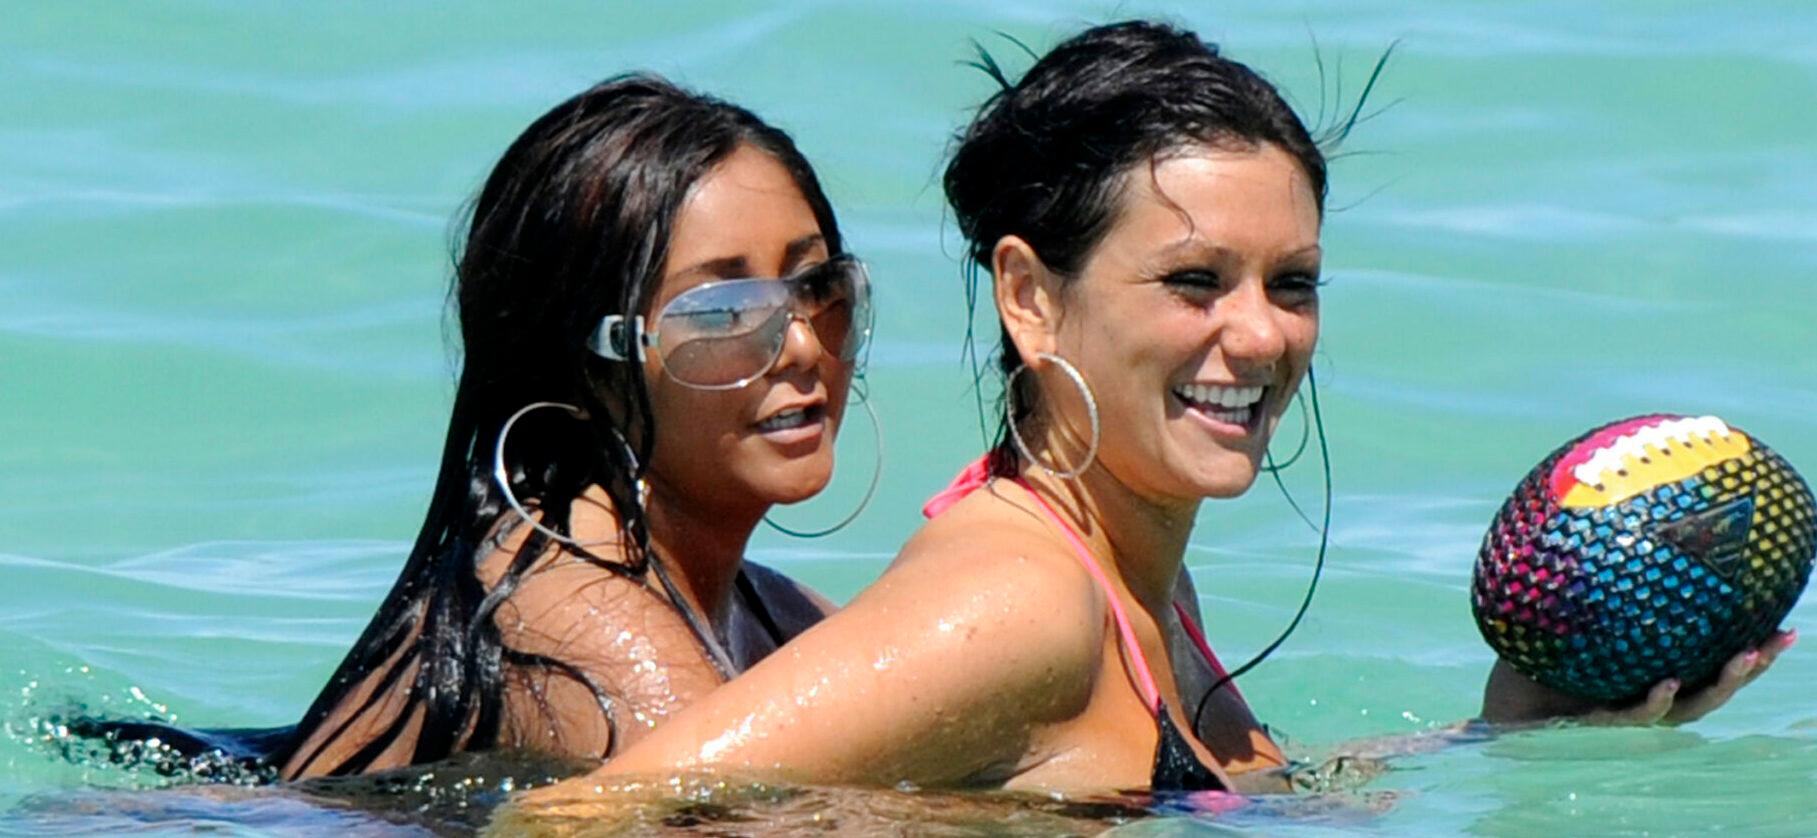 Why We're Still So Grateful for Snooki and JWoww's Friendship